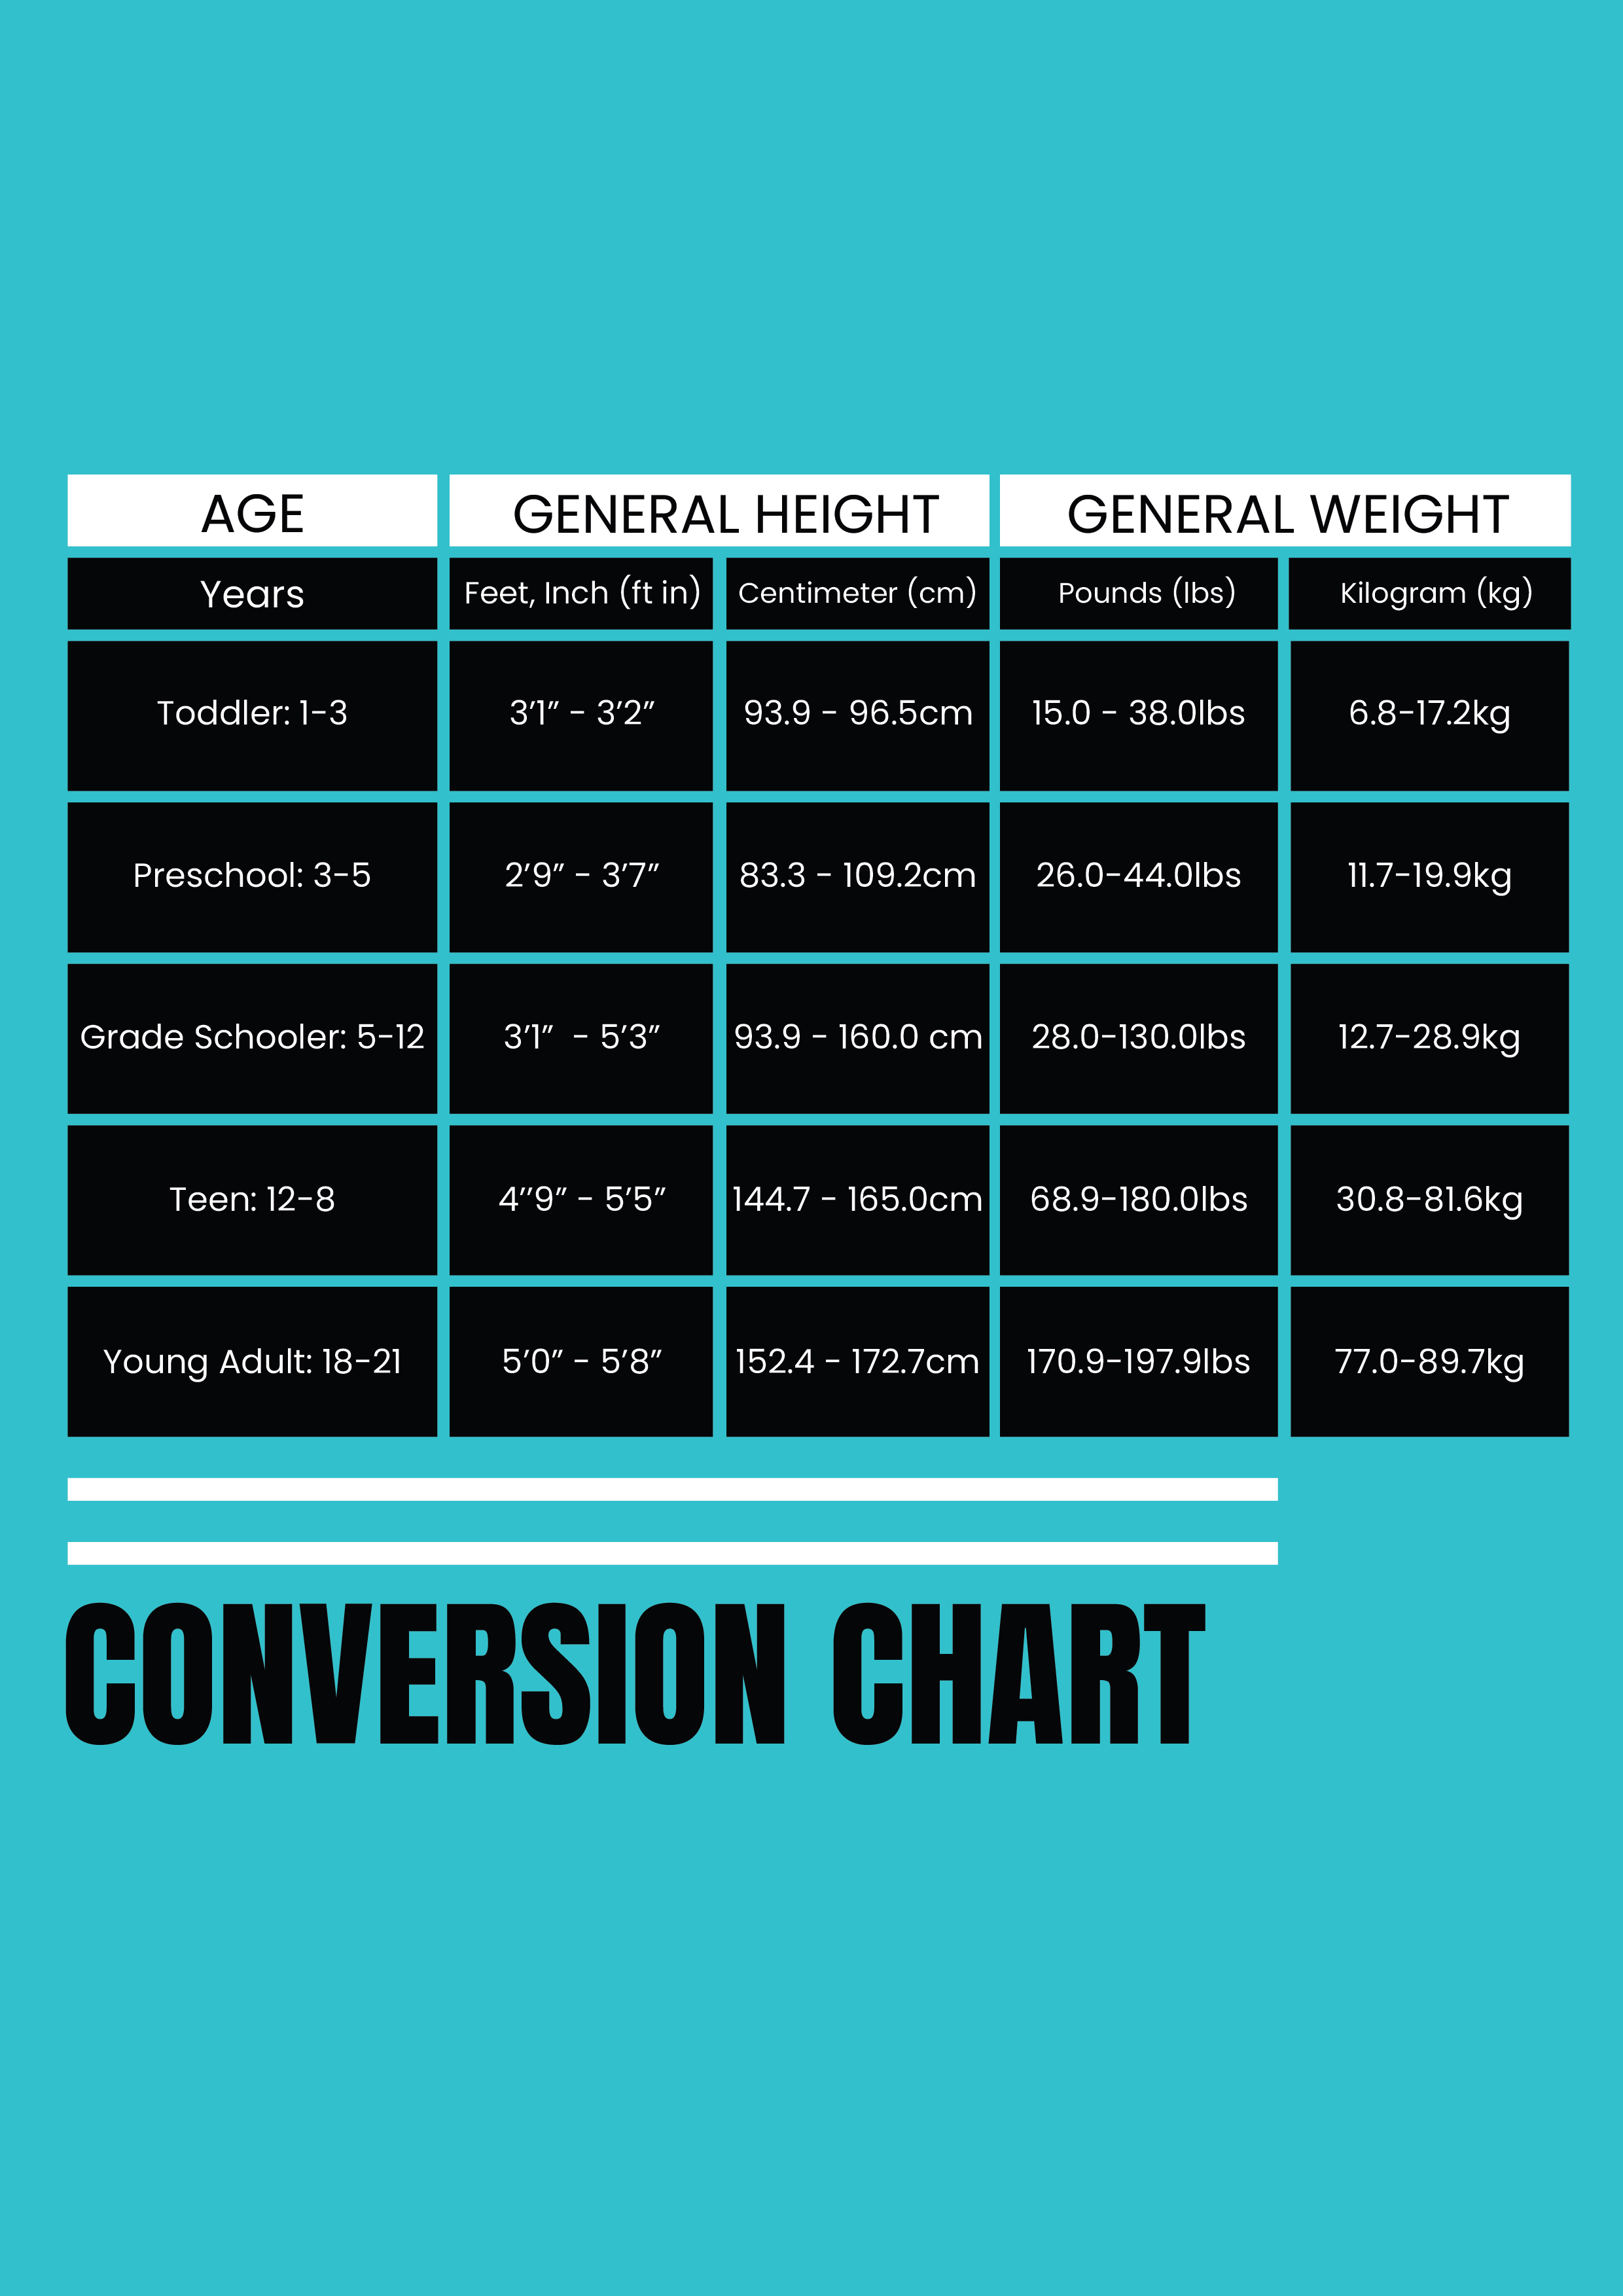 https://images.template.net/115281/free-general-height-and-weight-conversion-chart-8scwu.jpg